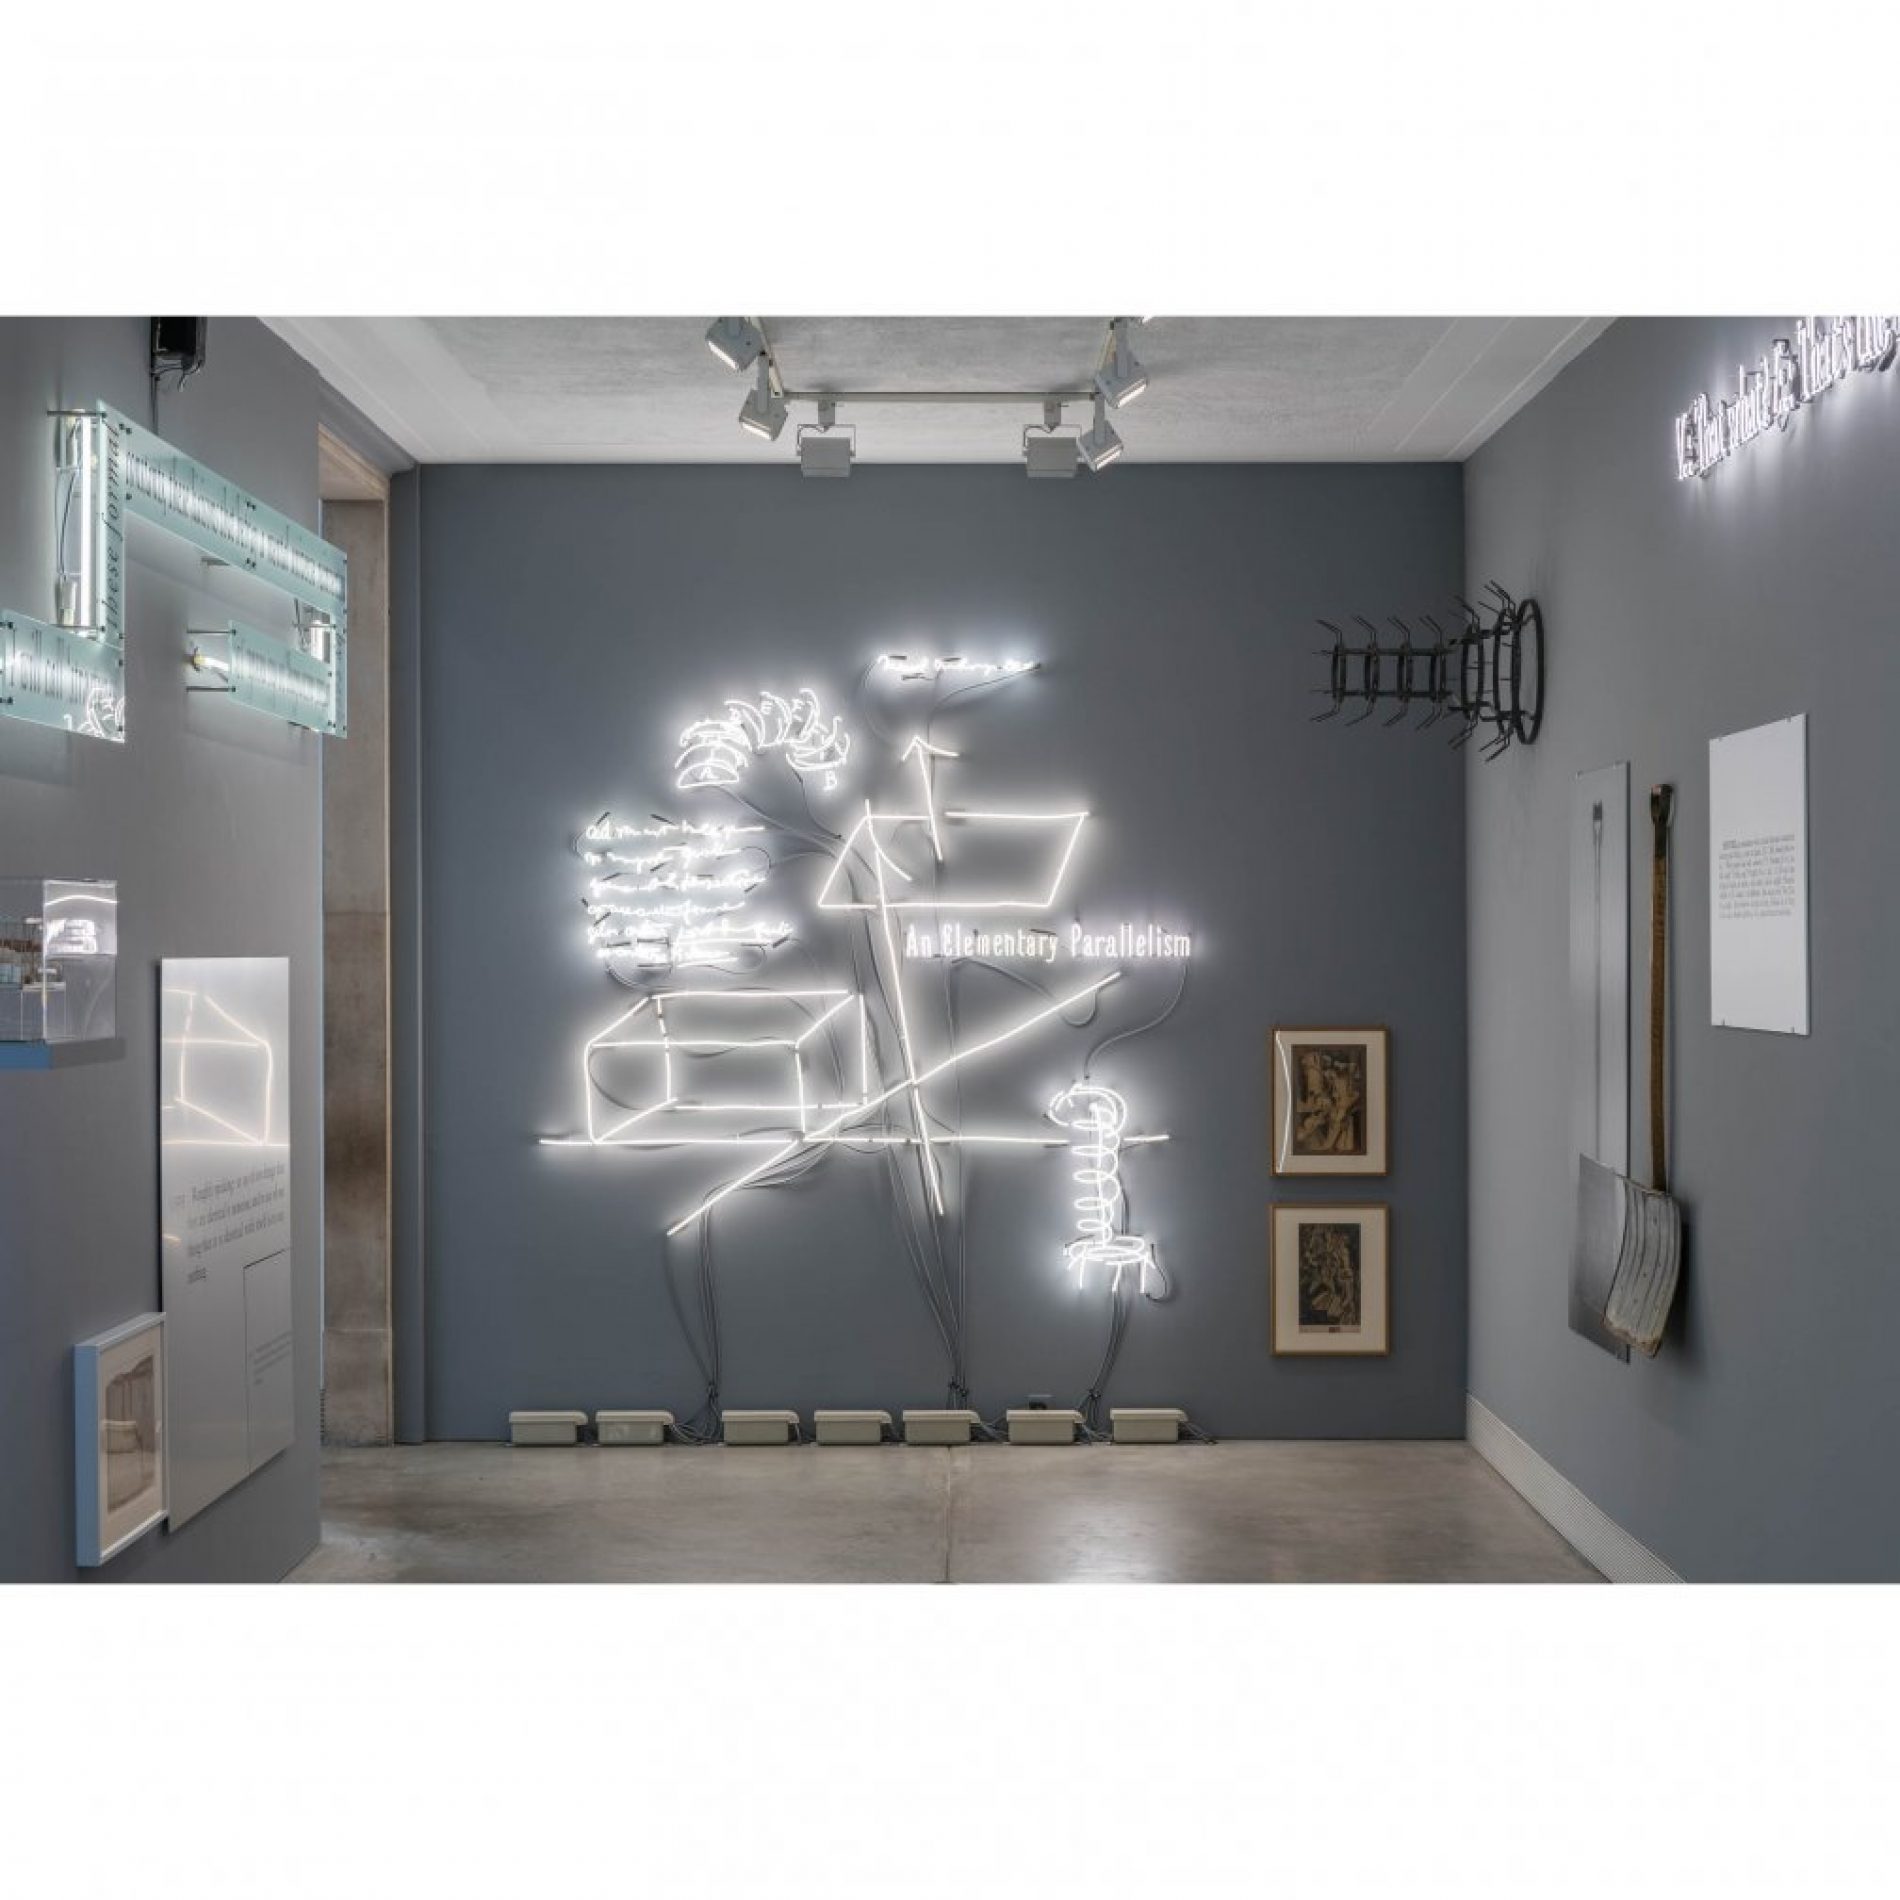 ‘Plays of / for a Respirateur’ An Installation by Joseph Kosuth – October 21, 2015 – October 30, 2016